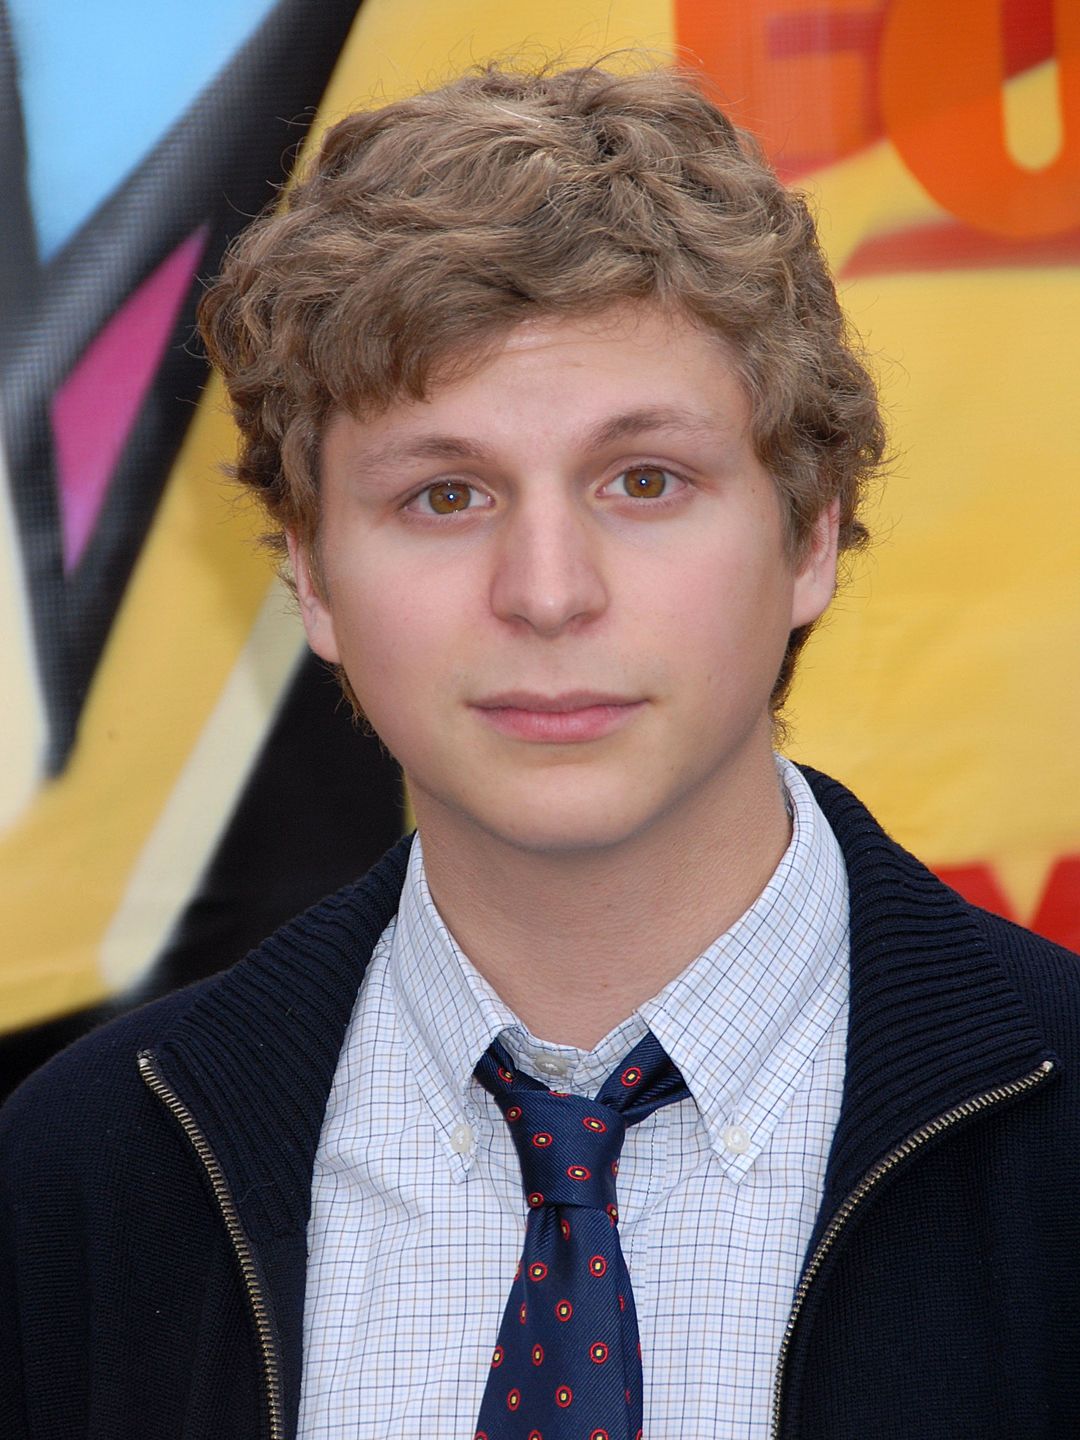 Michael Cera where is he now